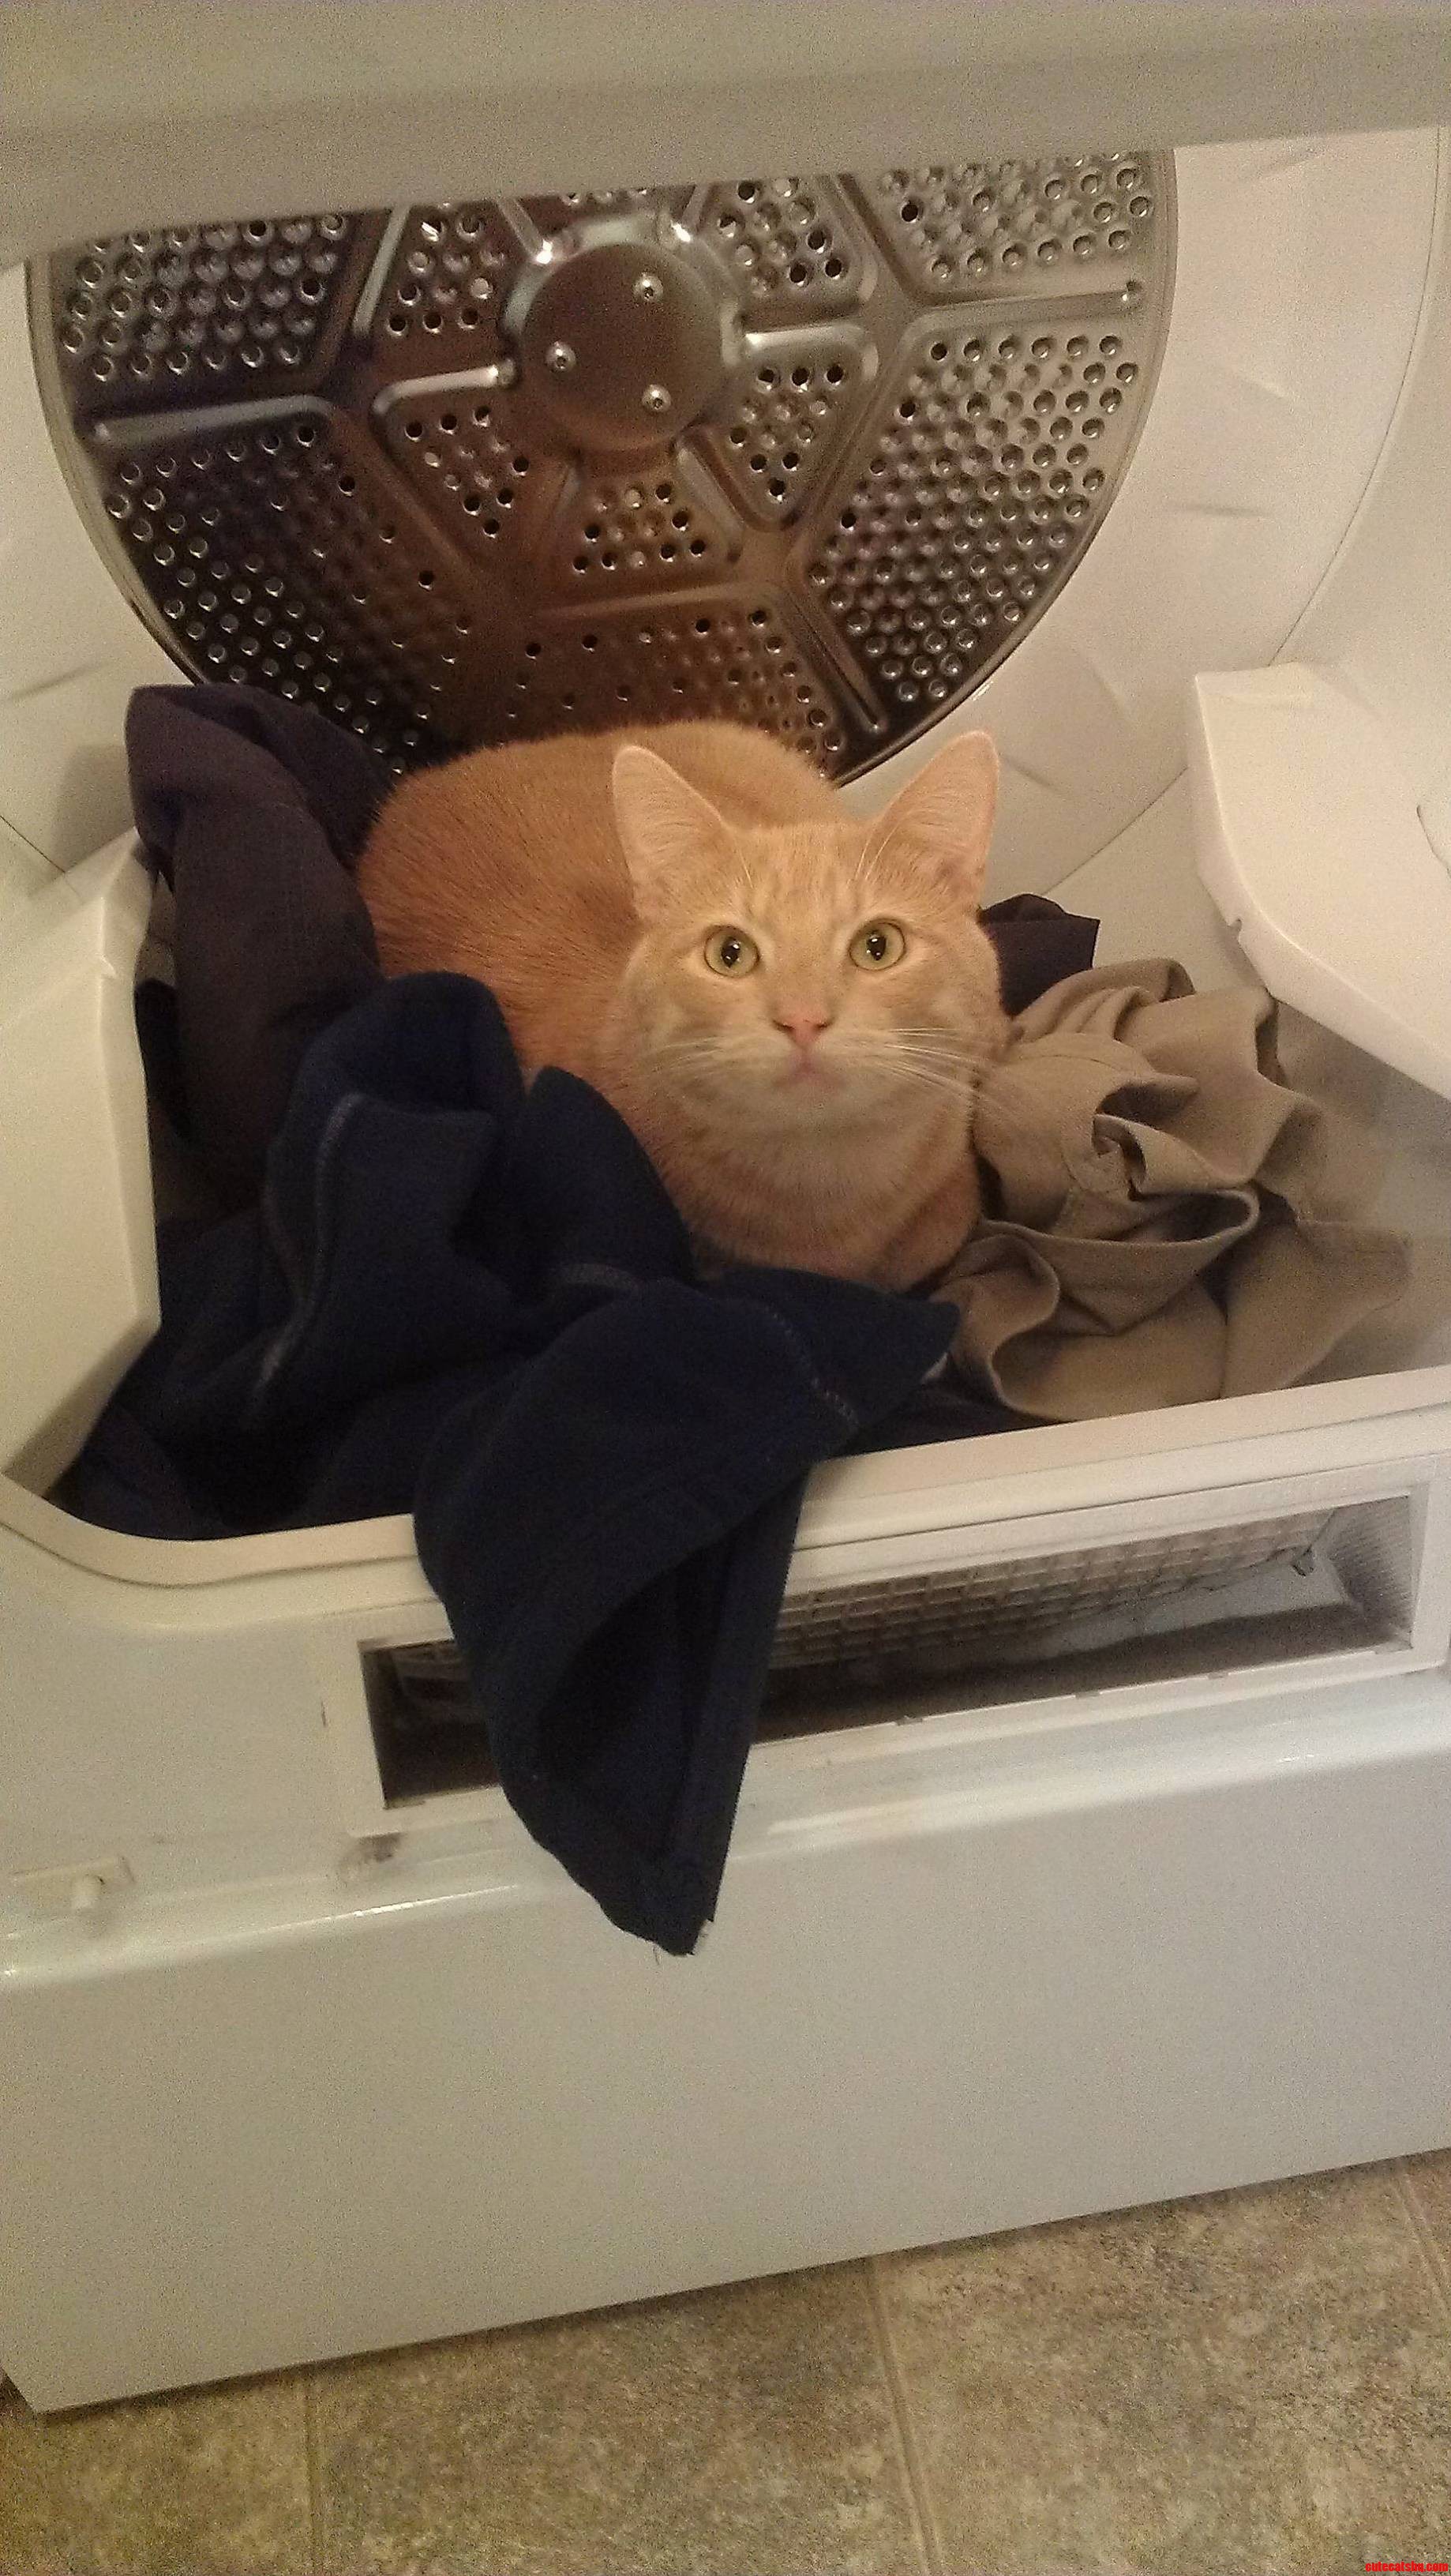 William Catner Enjoys Helping With The Household Chores.